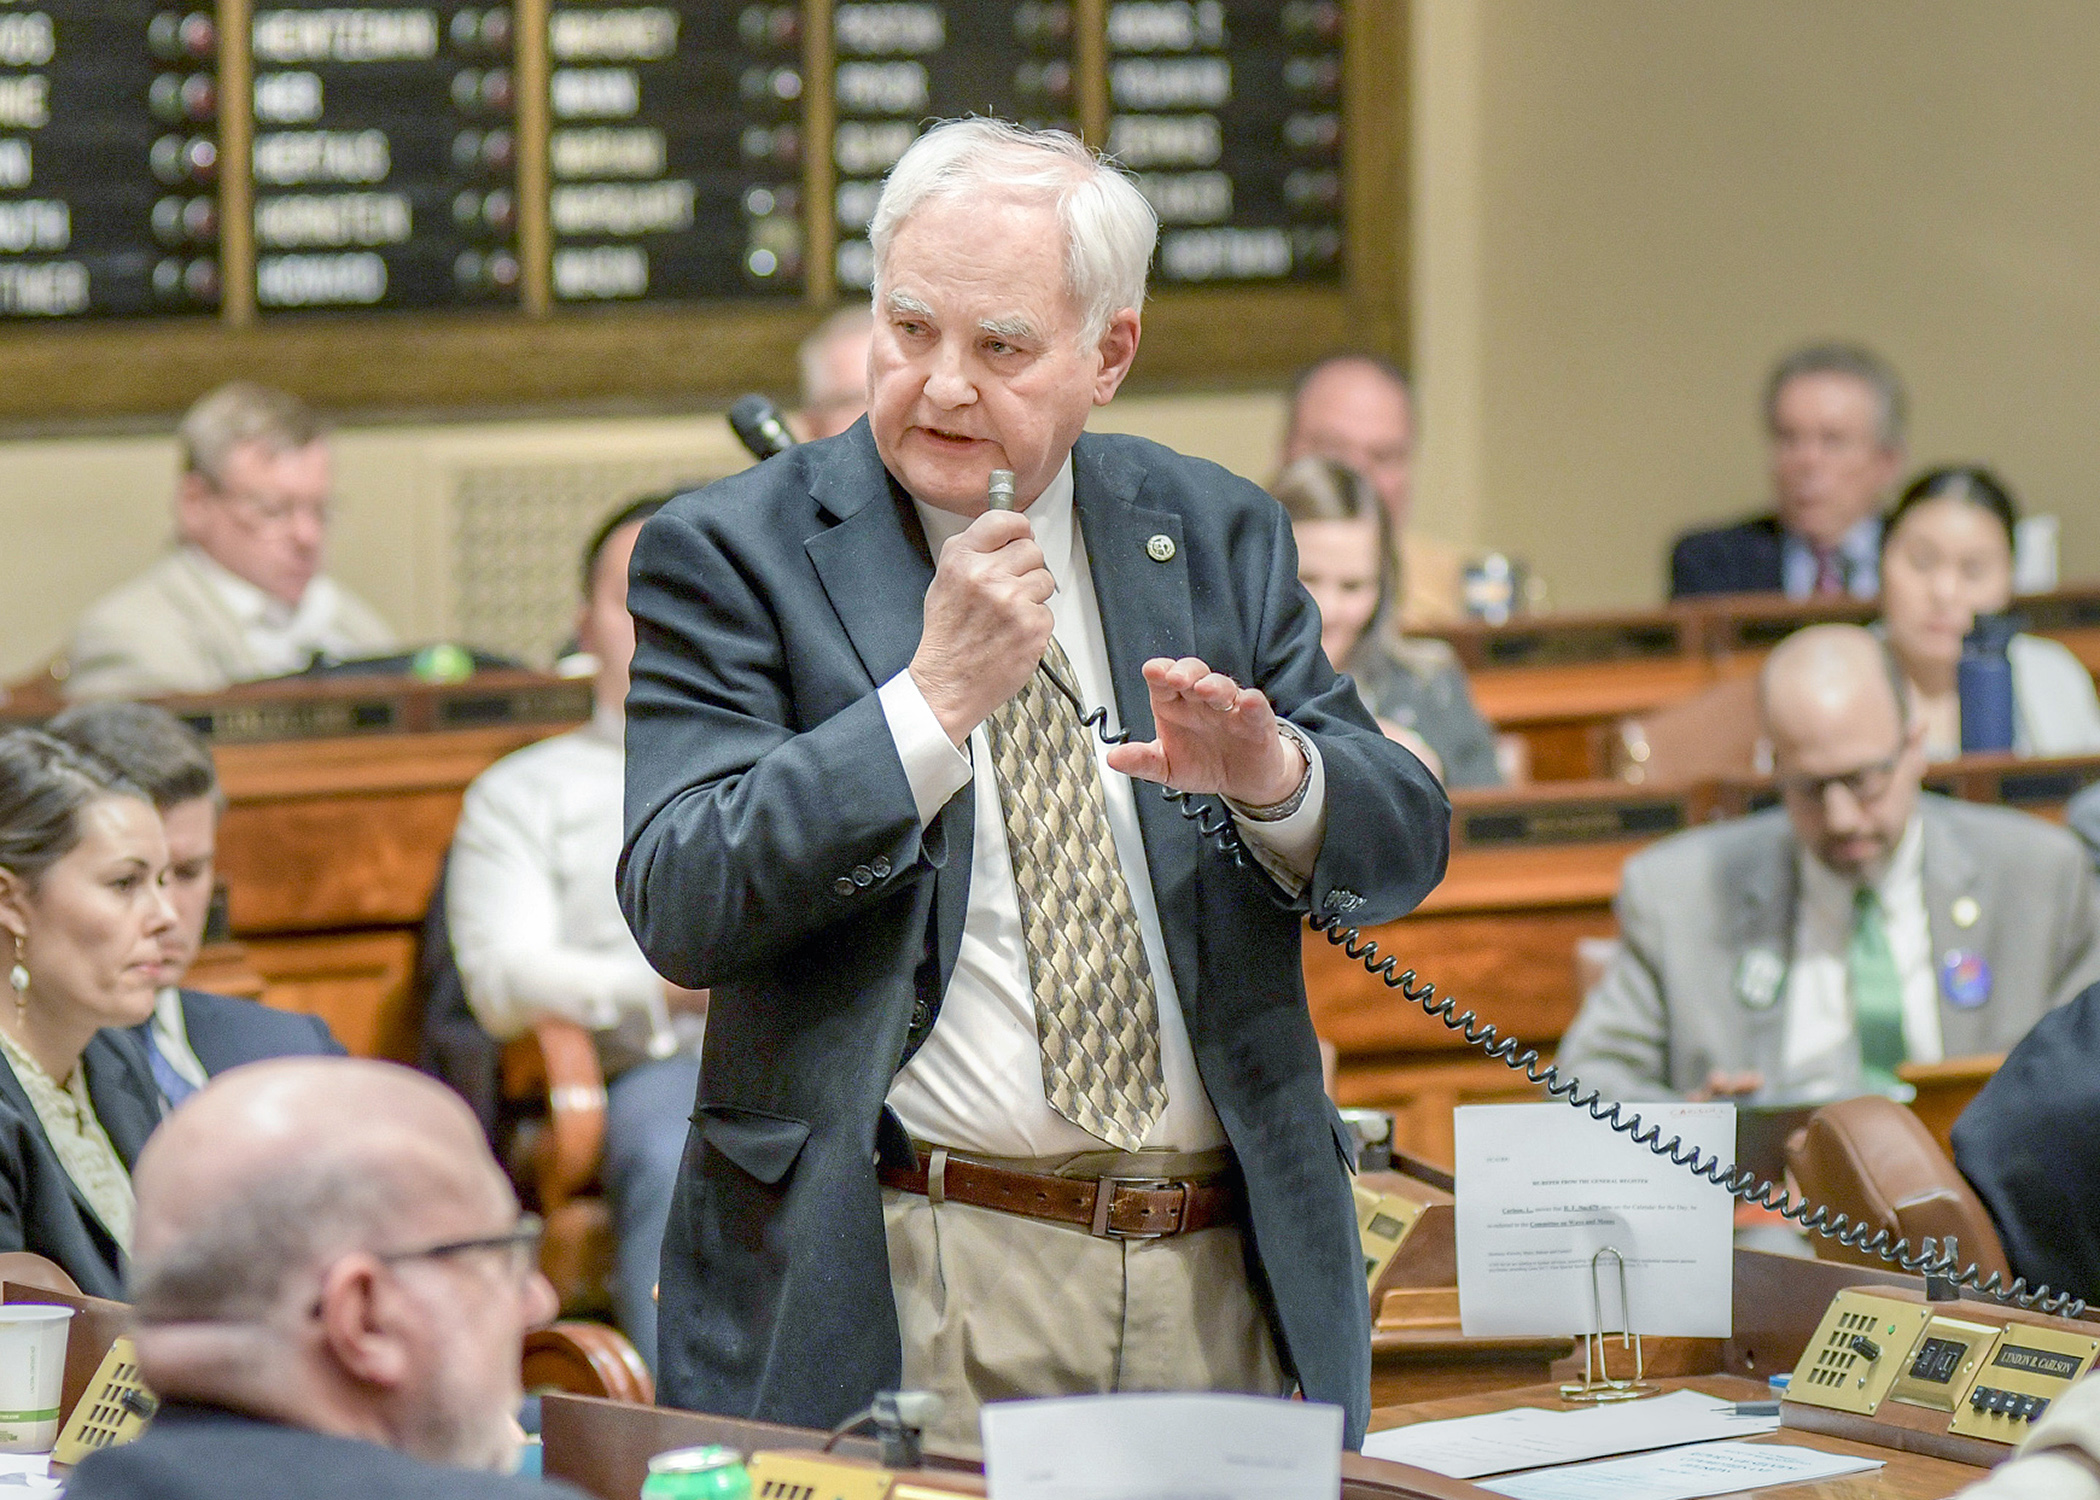 Rep. Lyndon Carlson, Sr., pictured speaking on the House Floor in 2019, is the longest-serving legislator in state history. Carlson announced Wednesday he will not seek re-election in 2020. Photo by Andrew VonBank